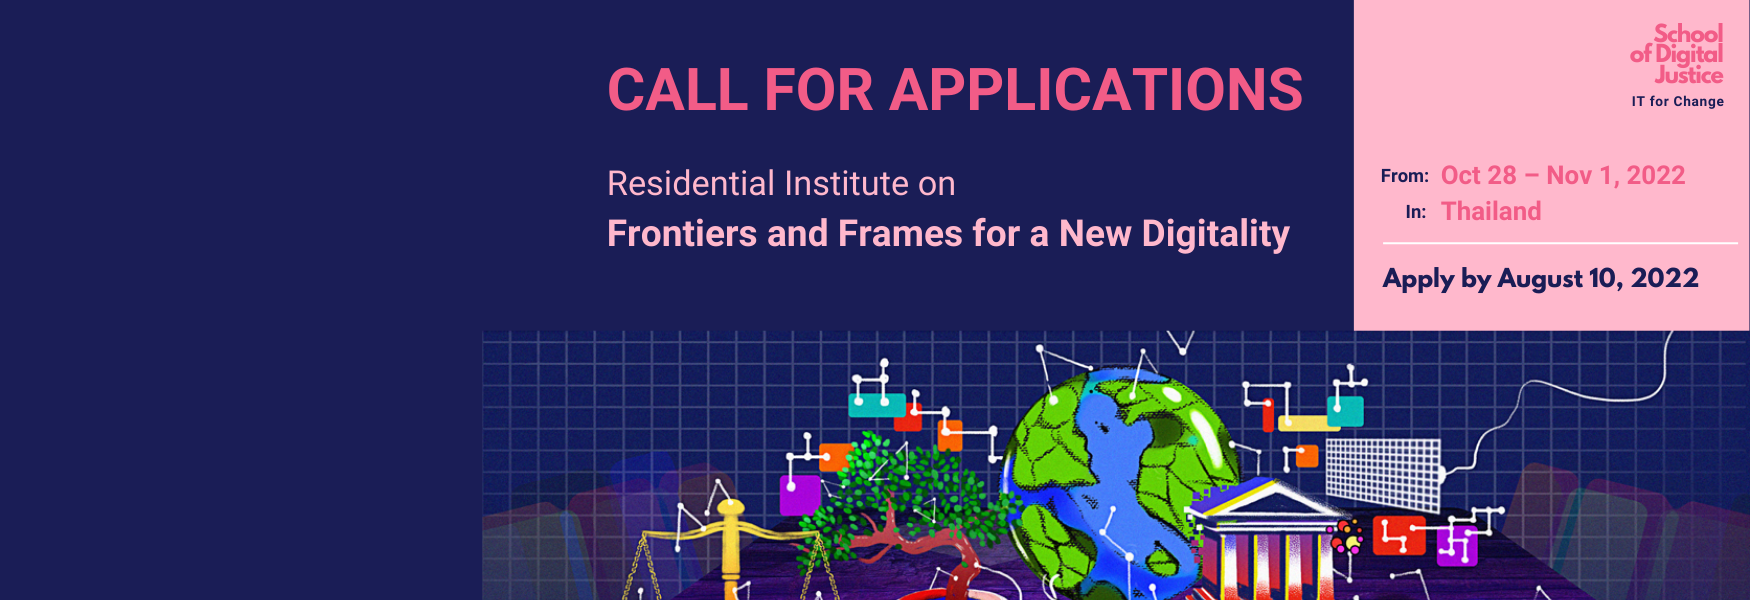  Call for Applications for Institute on Frontiers and Frames for a New Digitality